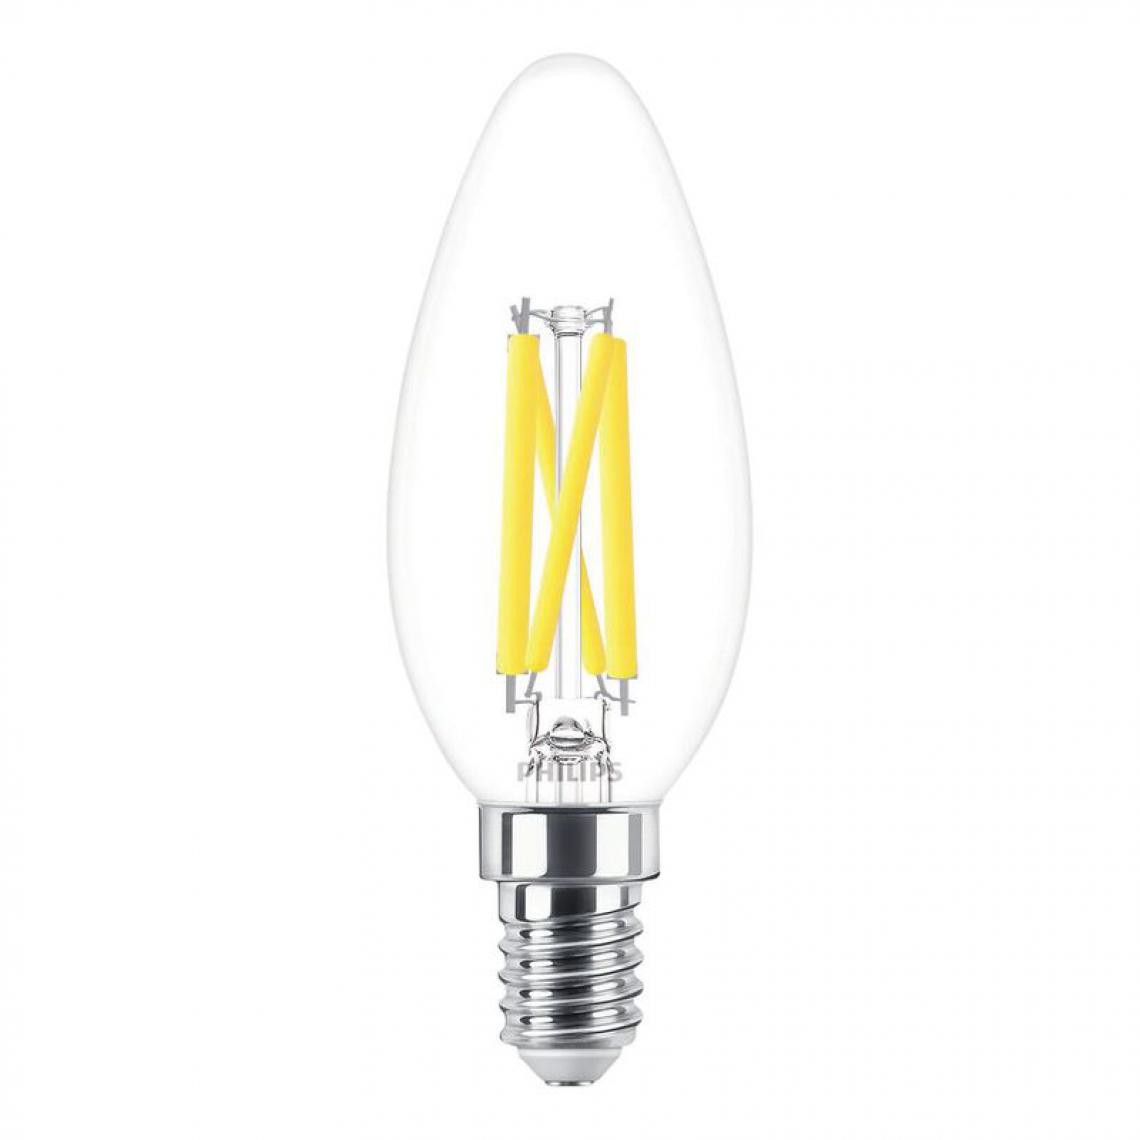 Philips - Ampoule dimmable LED filament PHILIPS E14 40w - Ampoules LED